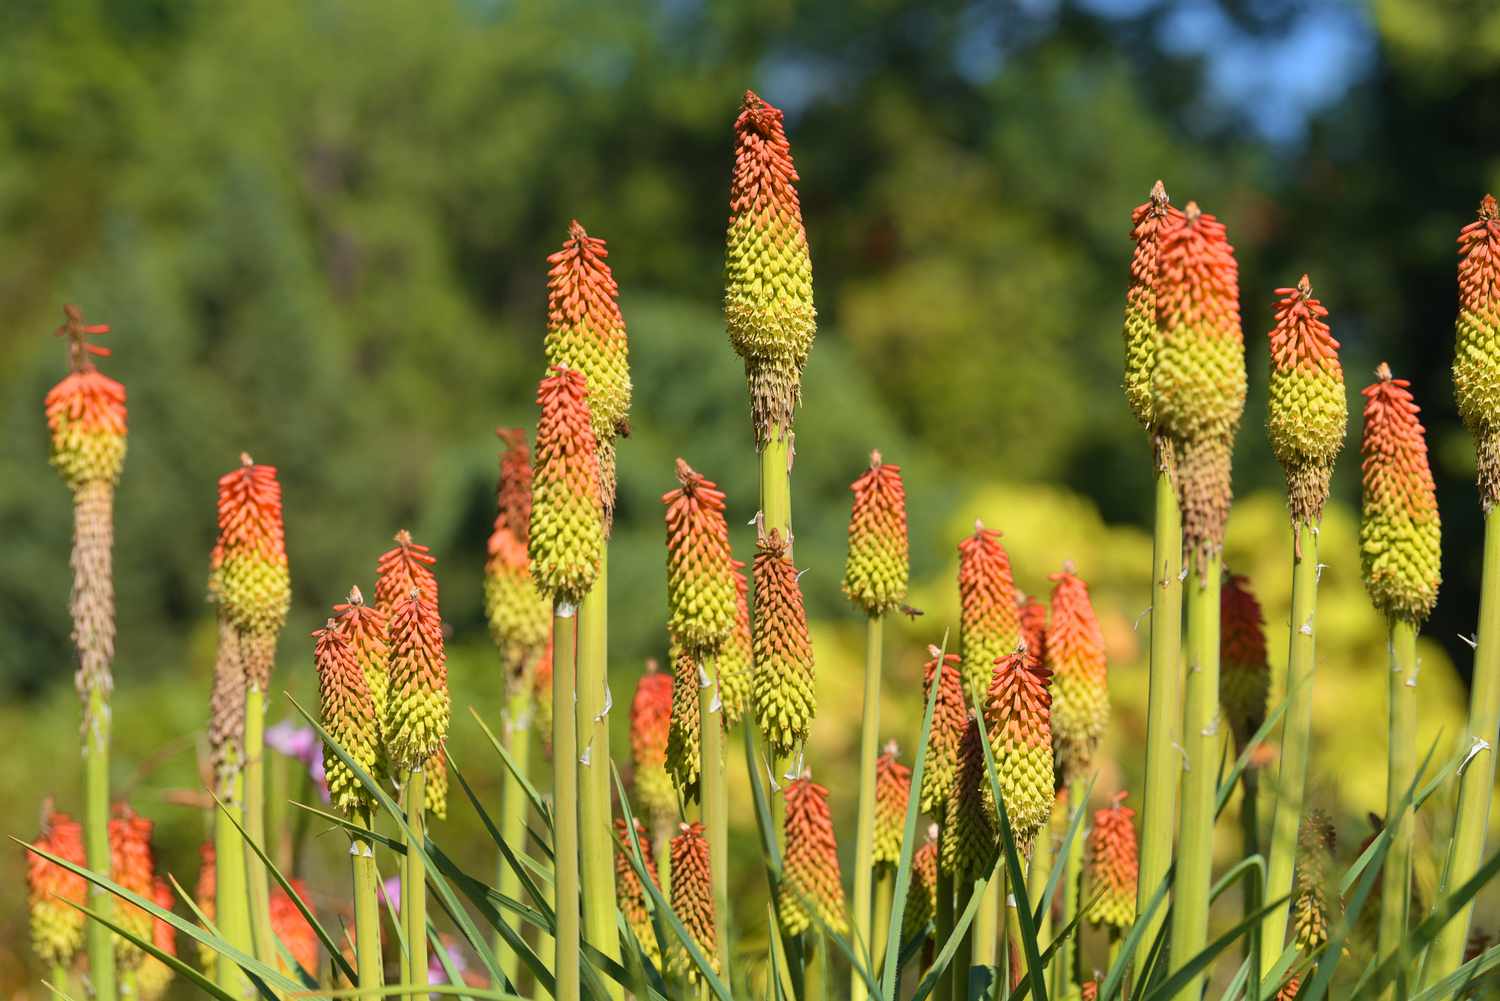 Red hot poker plant on tall thick stems with orange and yellow flower spikes 